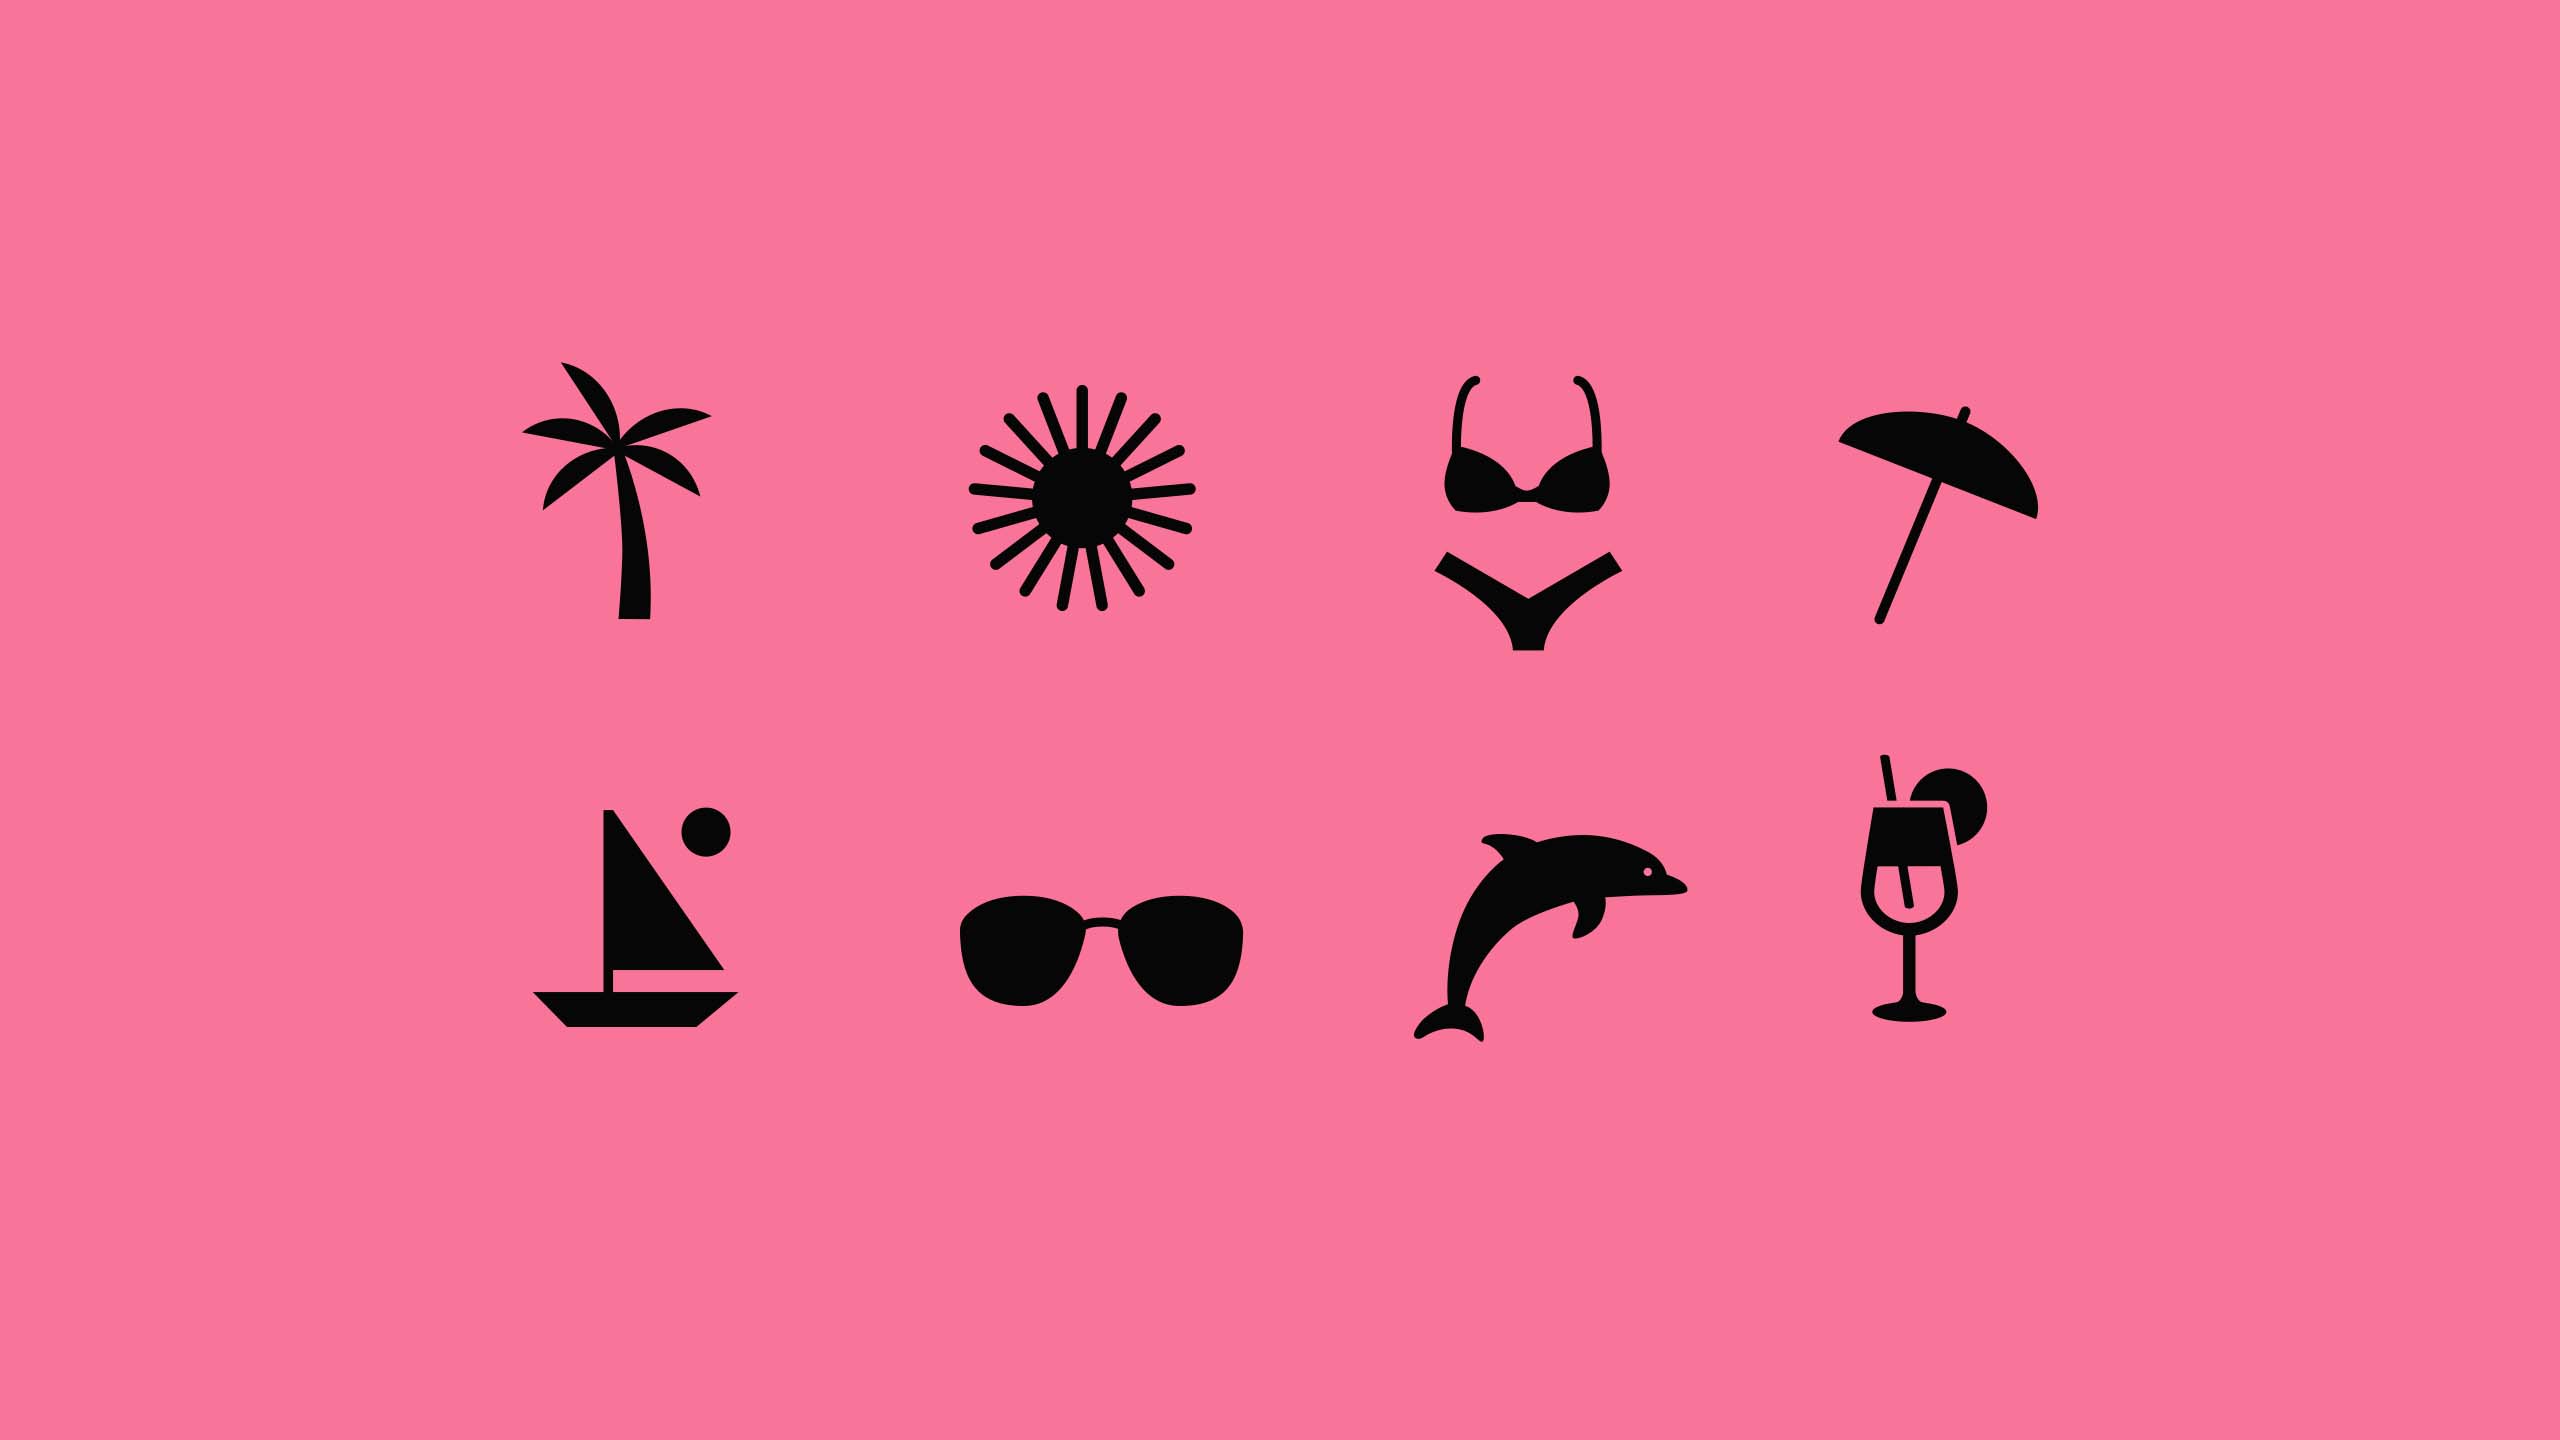 Graphics and icons designed for swimwear brand Blackbough